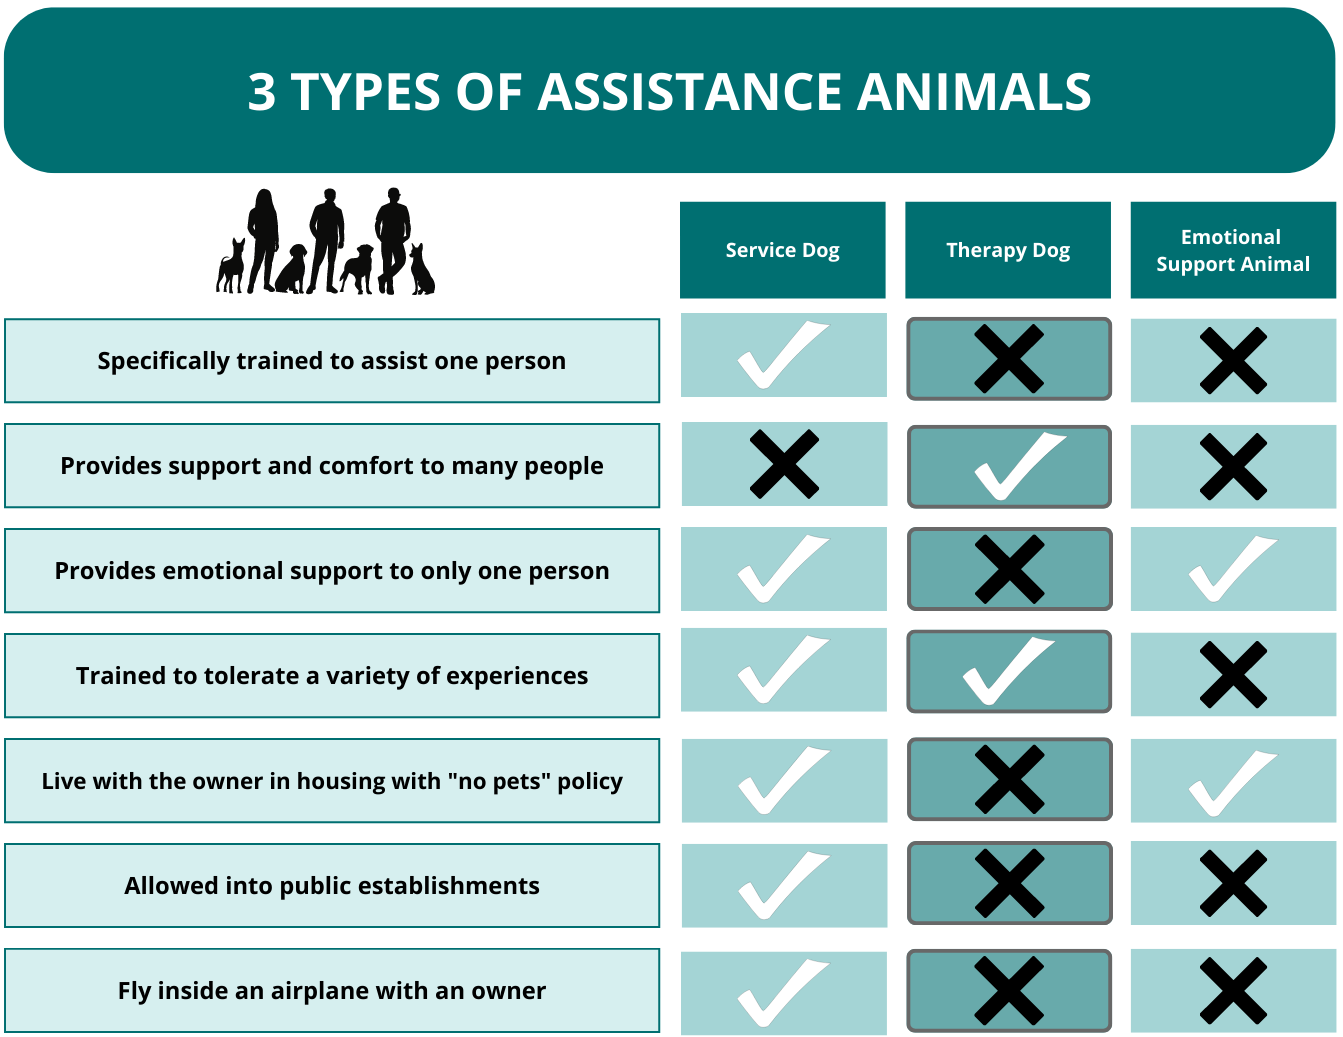 a comparison of three service dog types, service, therapy, and emotional support